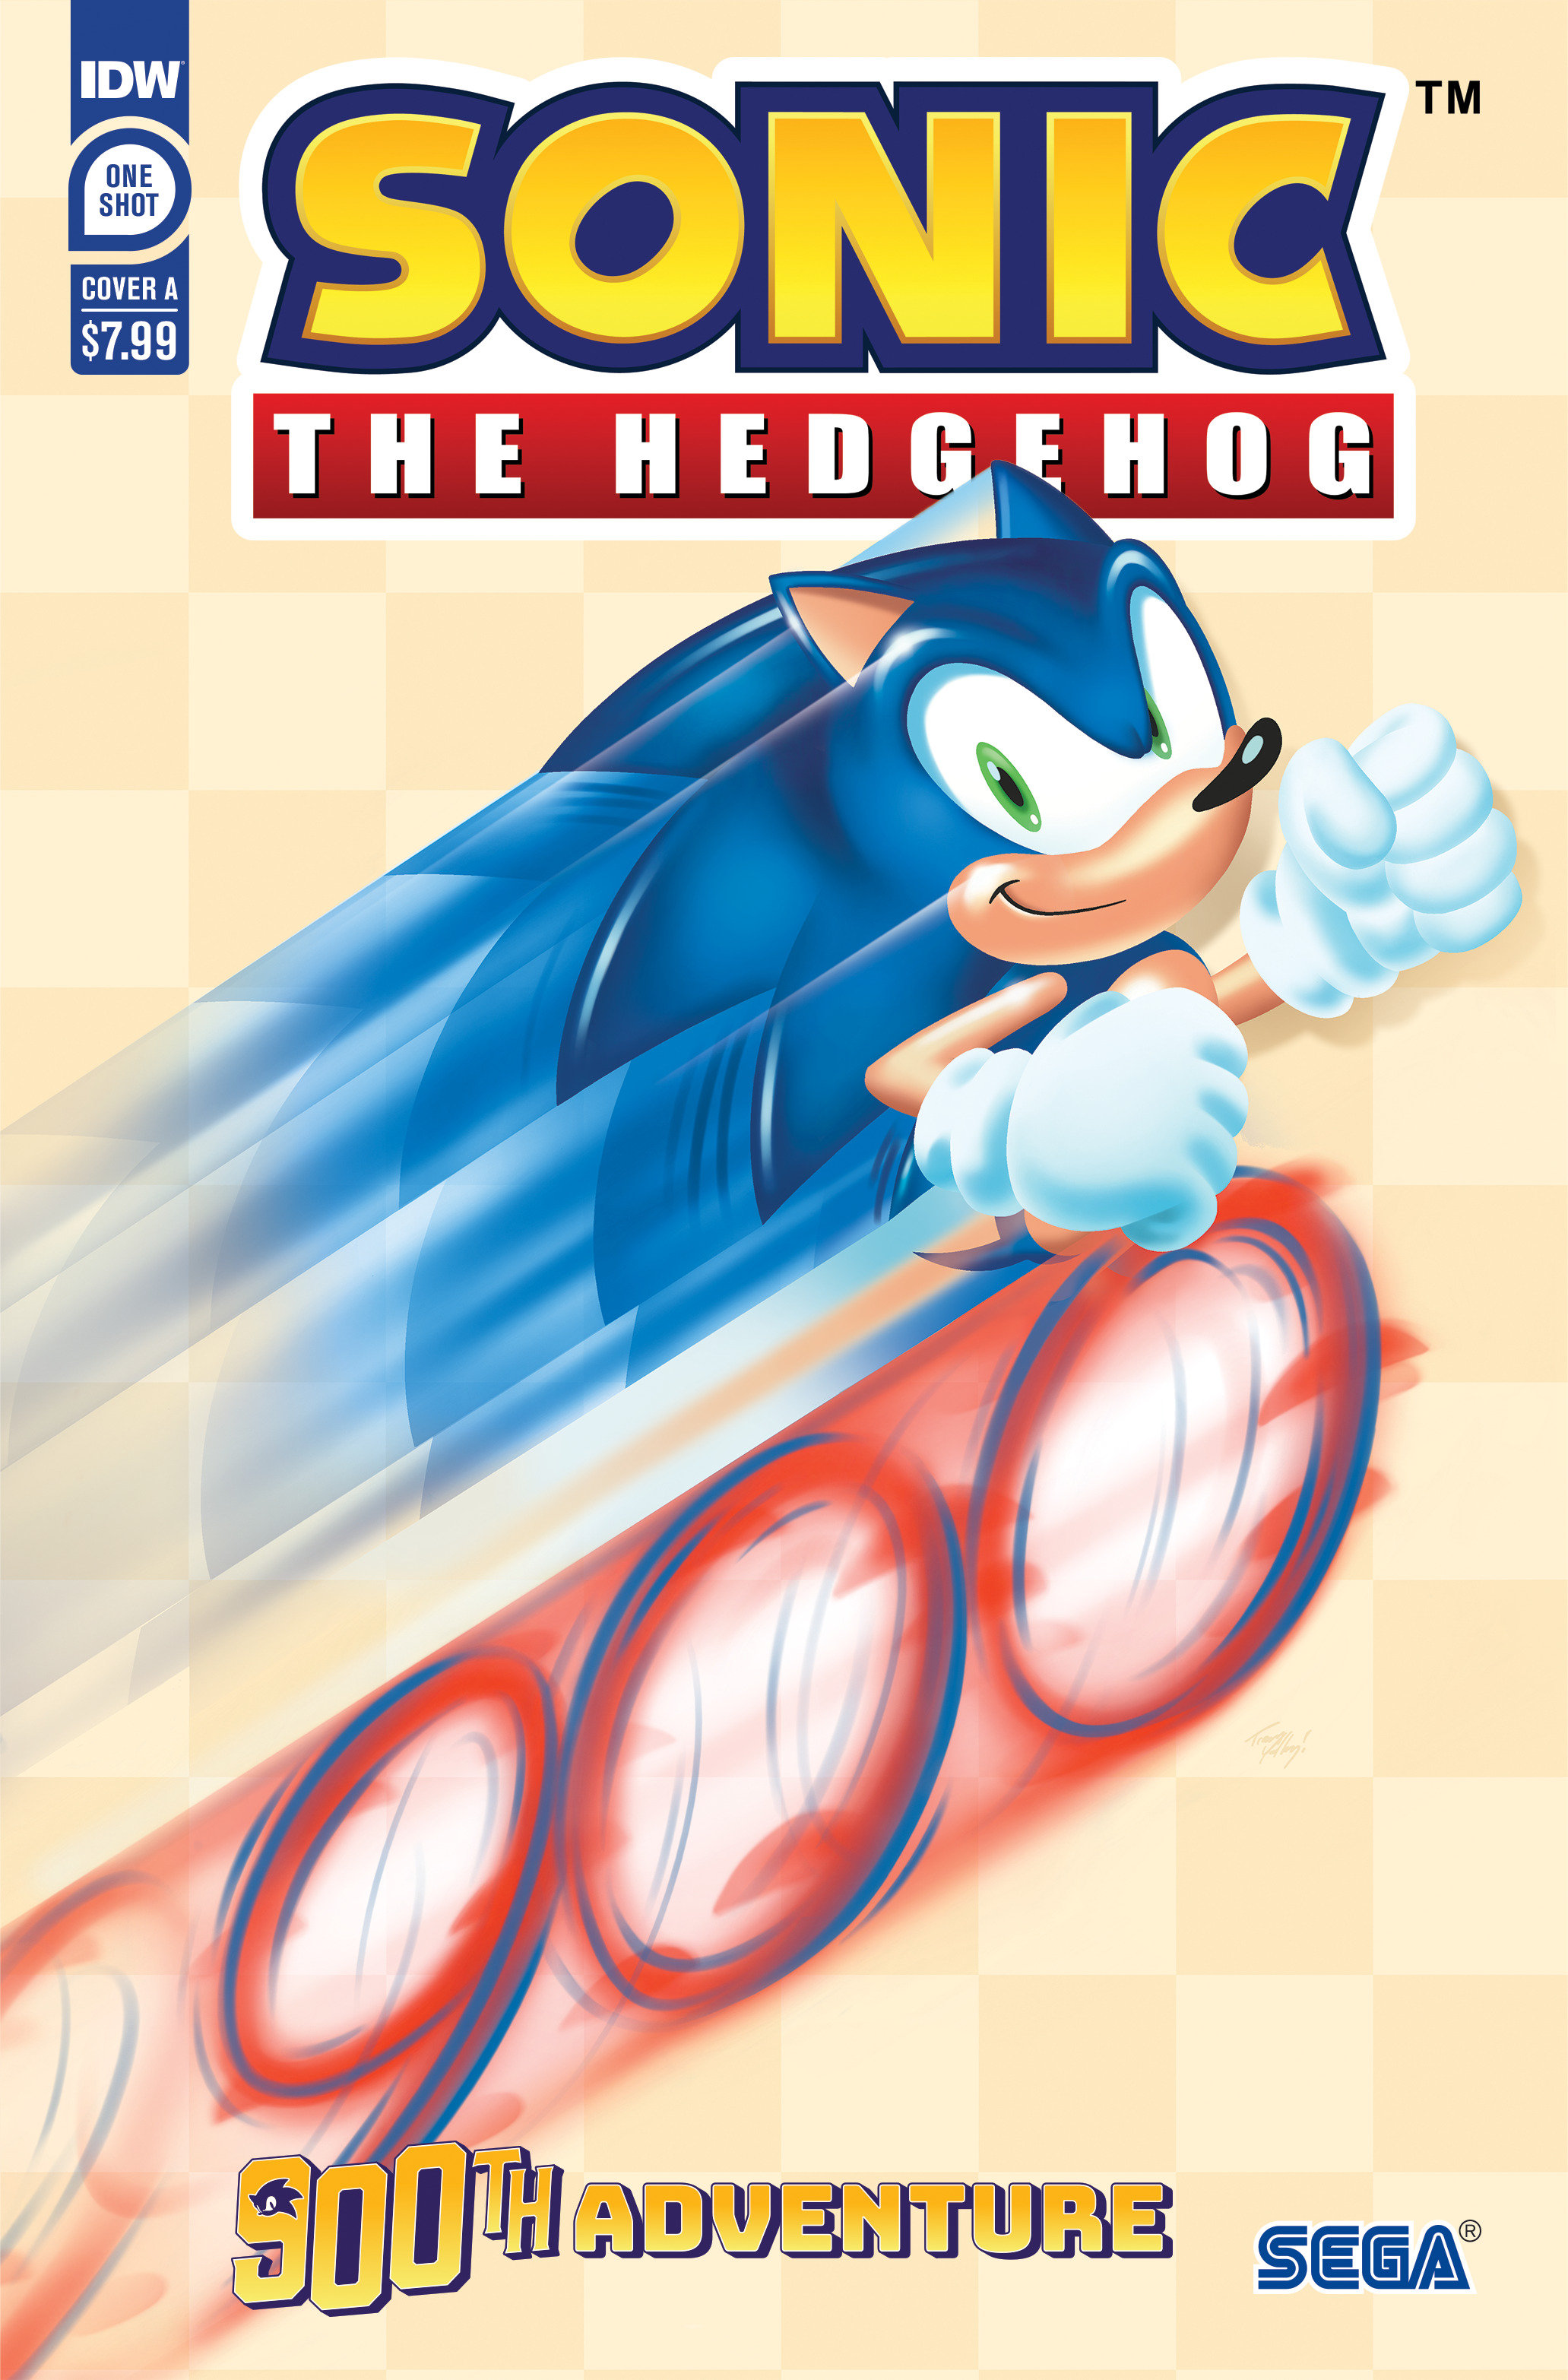 Sonic the Hedgehog’s #900th Adventure Cover A Yardley